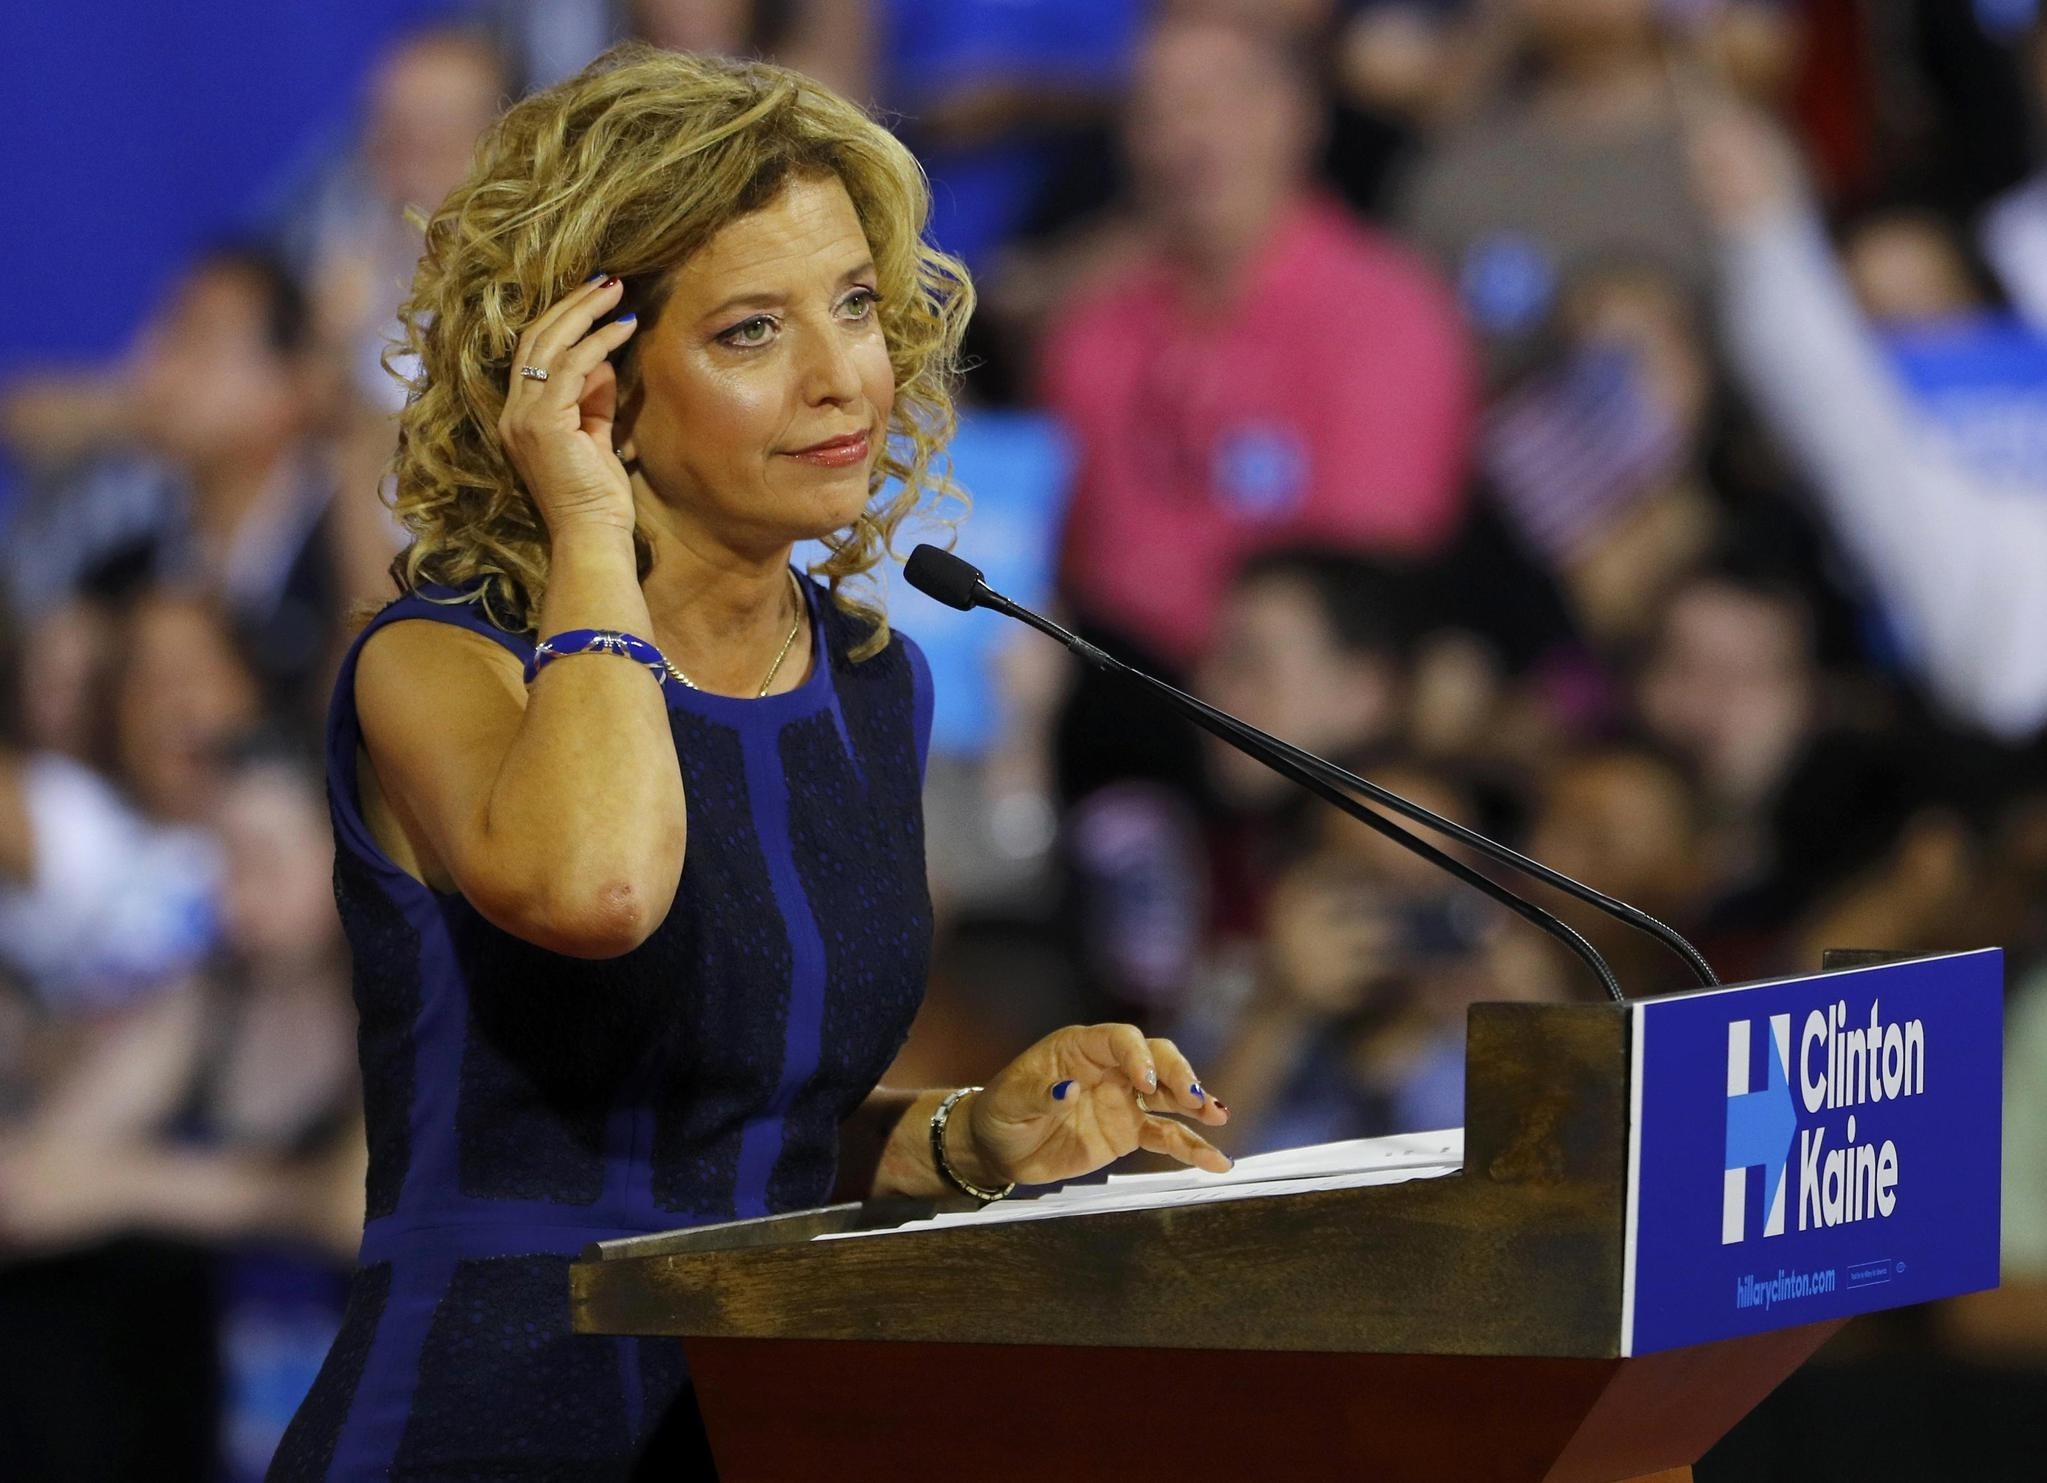 Democratic National Committee (DNC) Chairwoman Debbie Wasserman Schultz speaks at a rally, before the arrival of Clinton in Miami, Florida, U.S. July 23, 2016. (Reuters Photo)